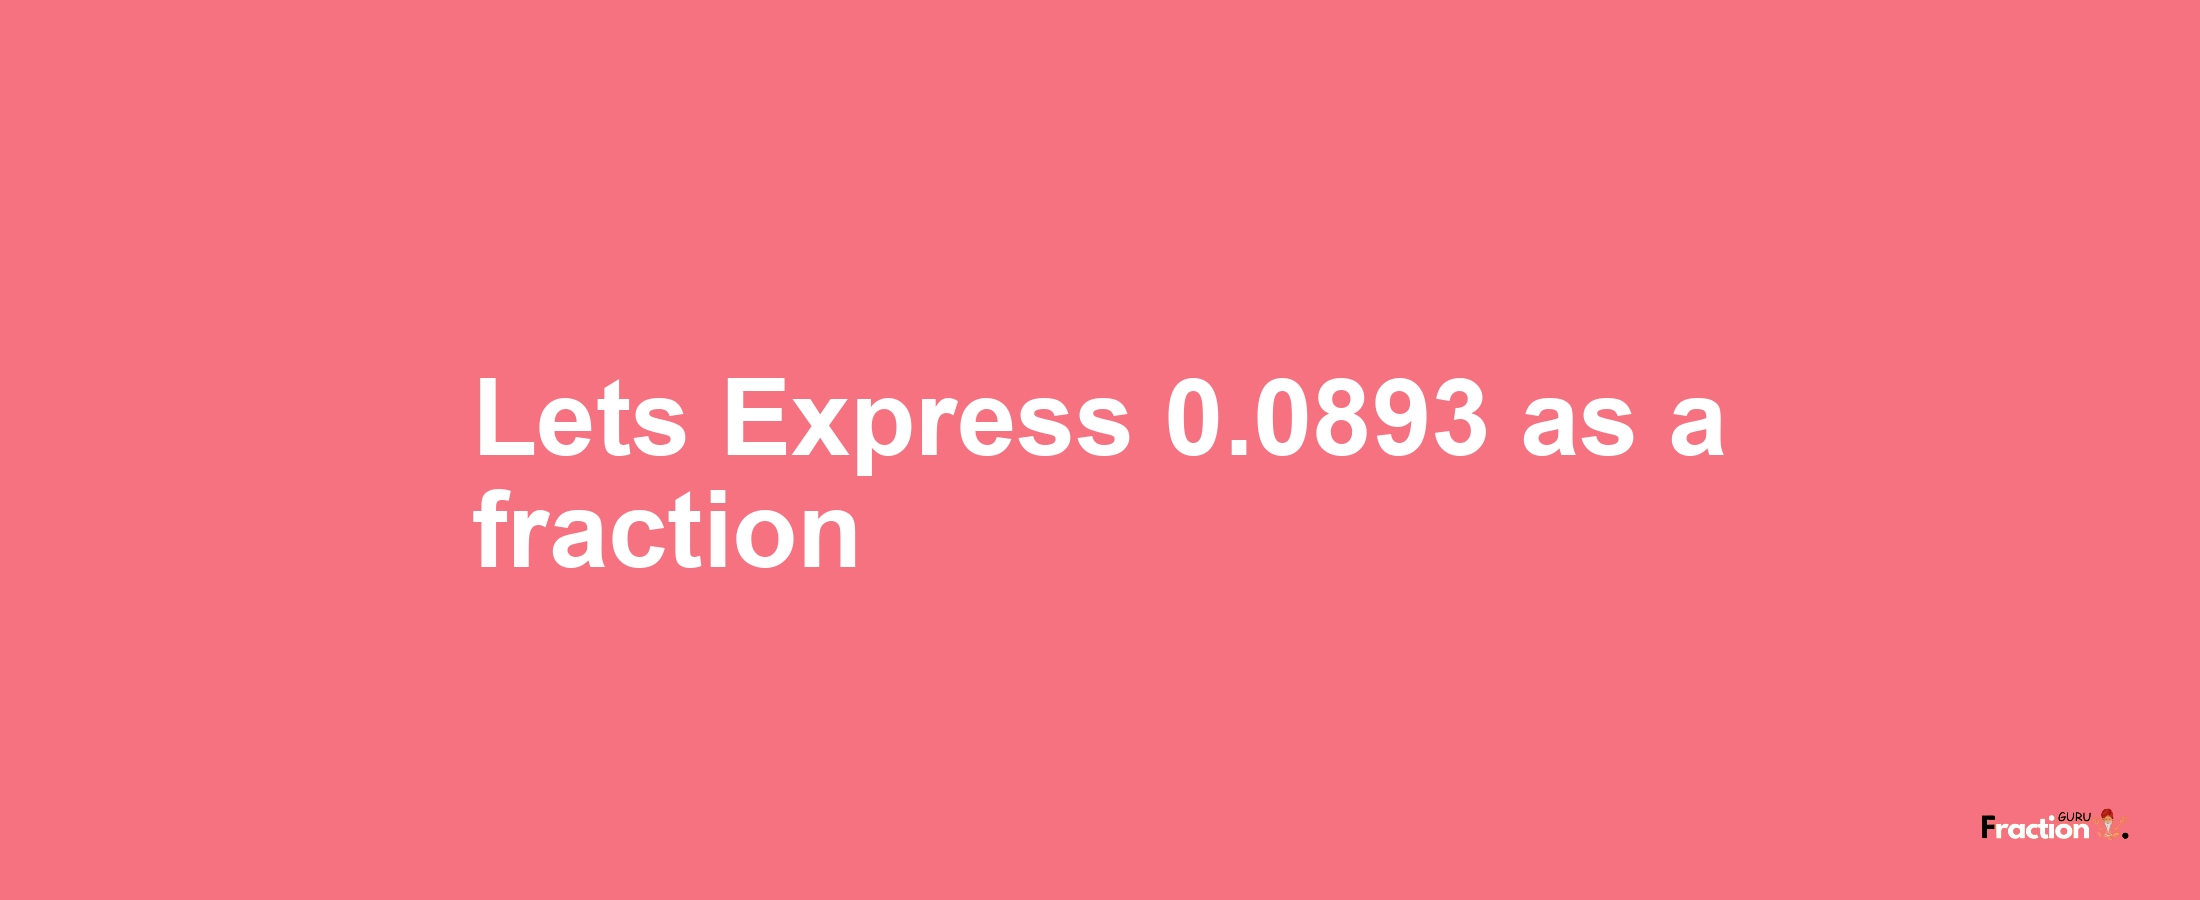 Lets Express 0.0893 as afraction